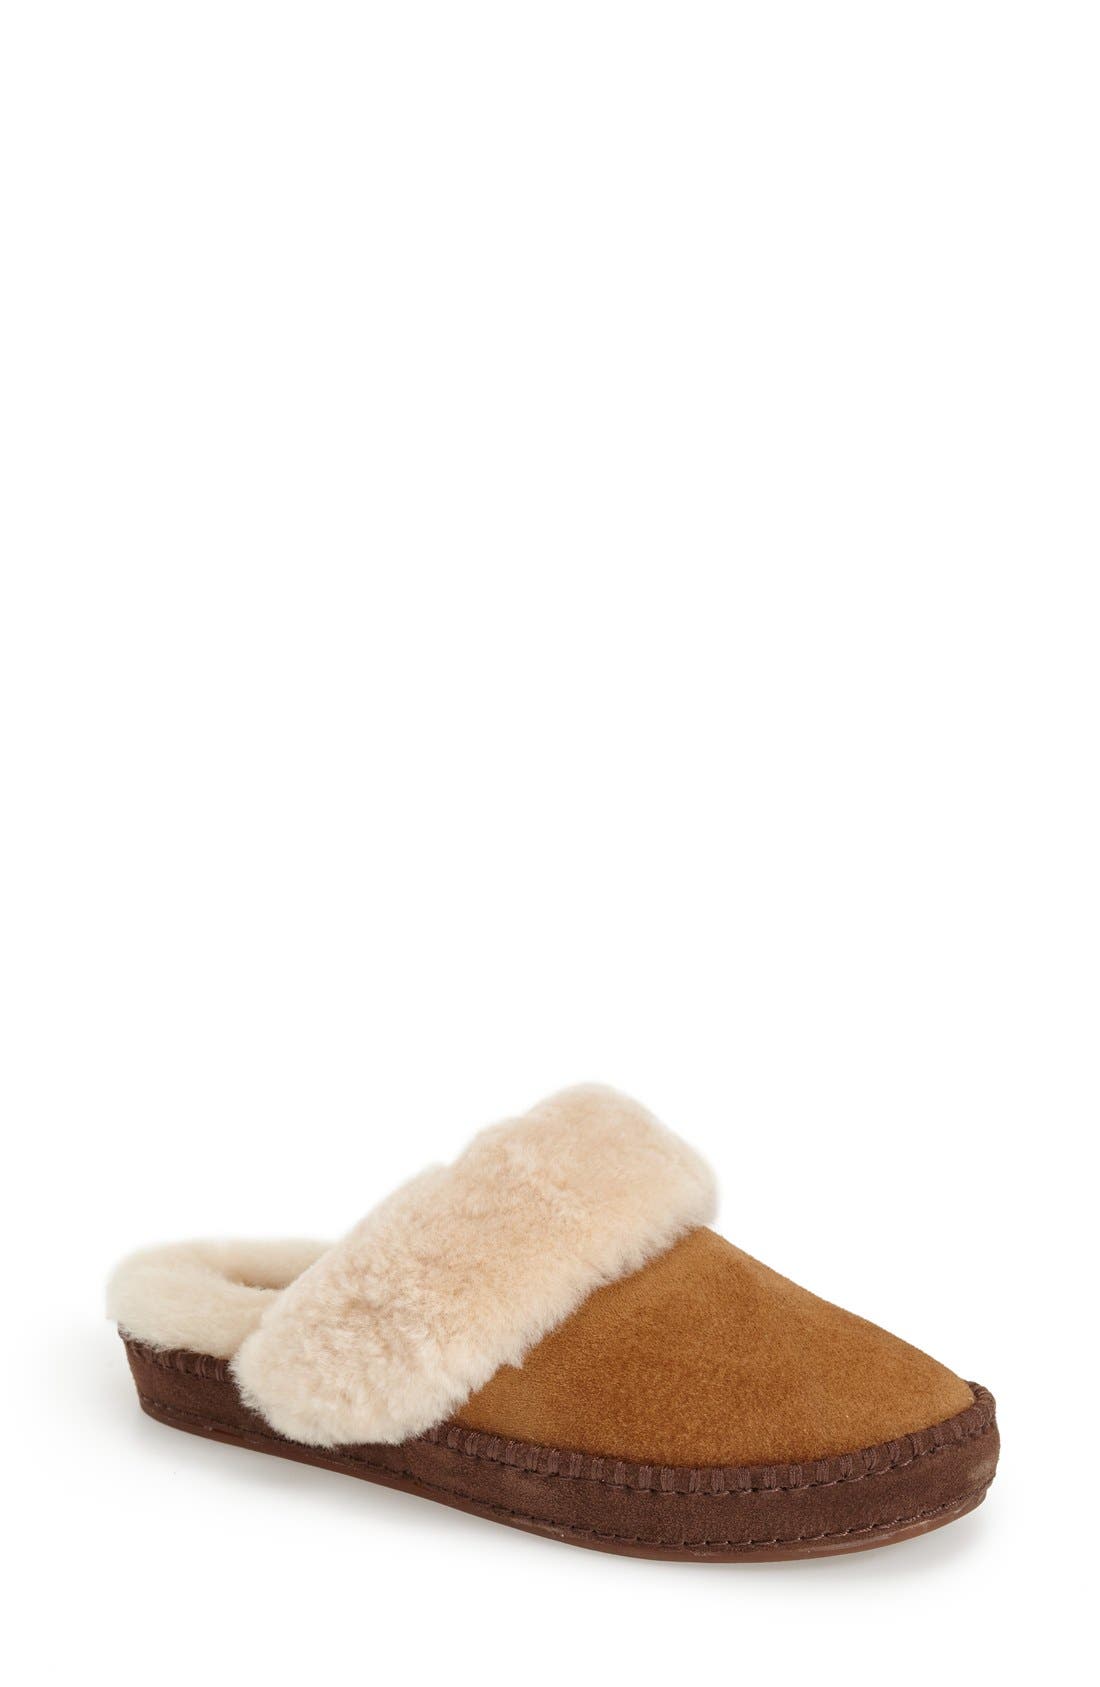 ugg aira slippers size 7